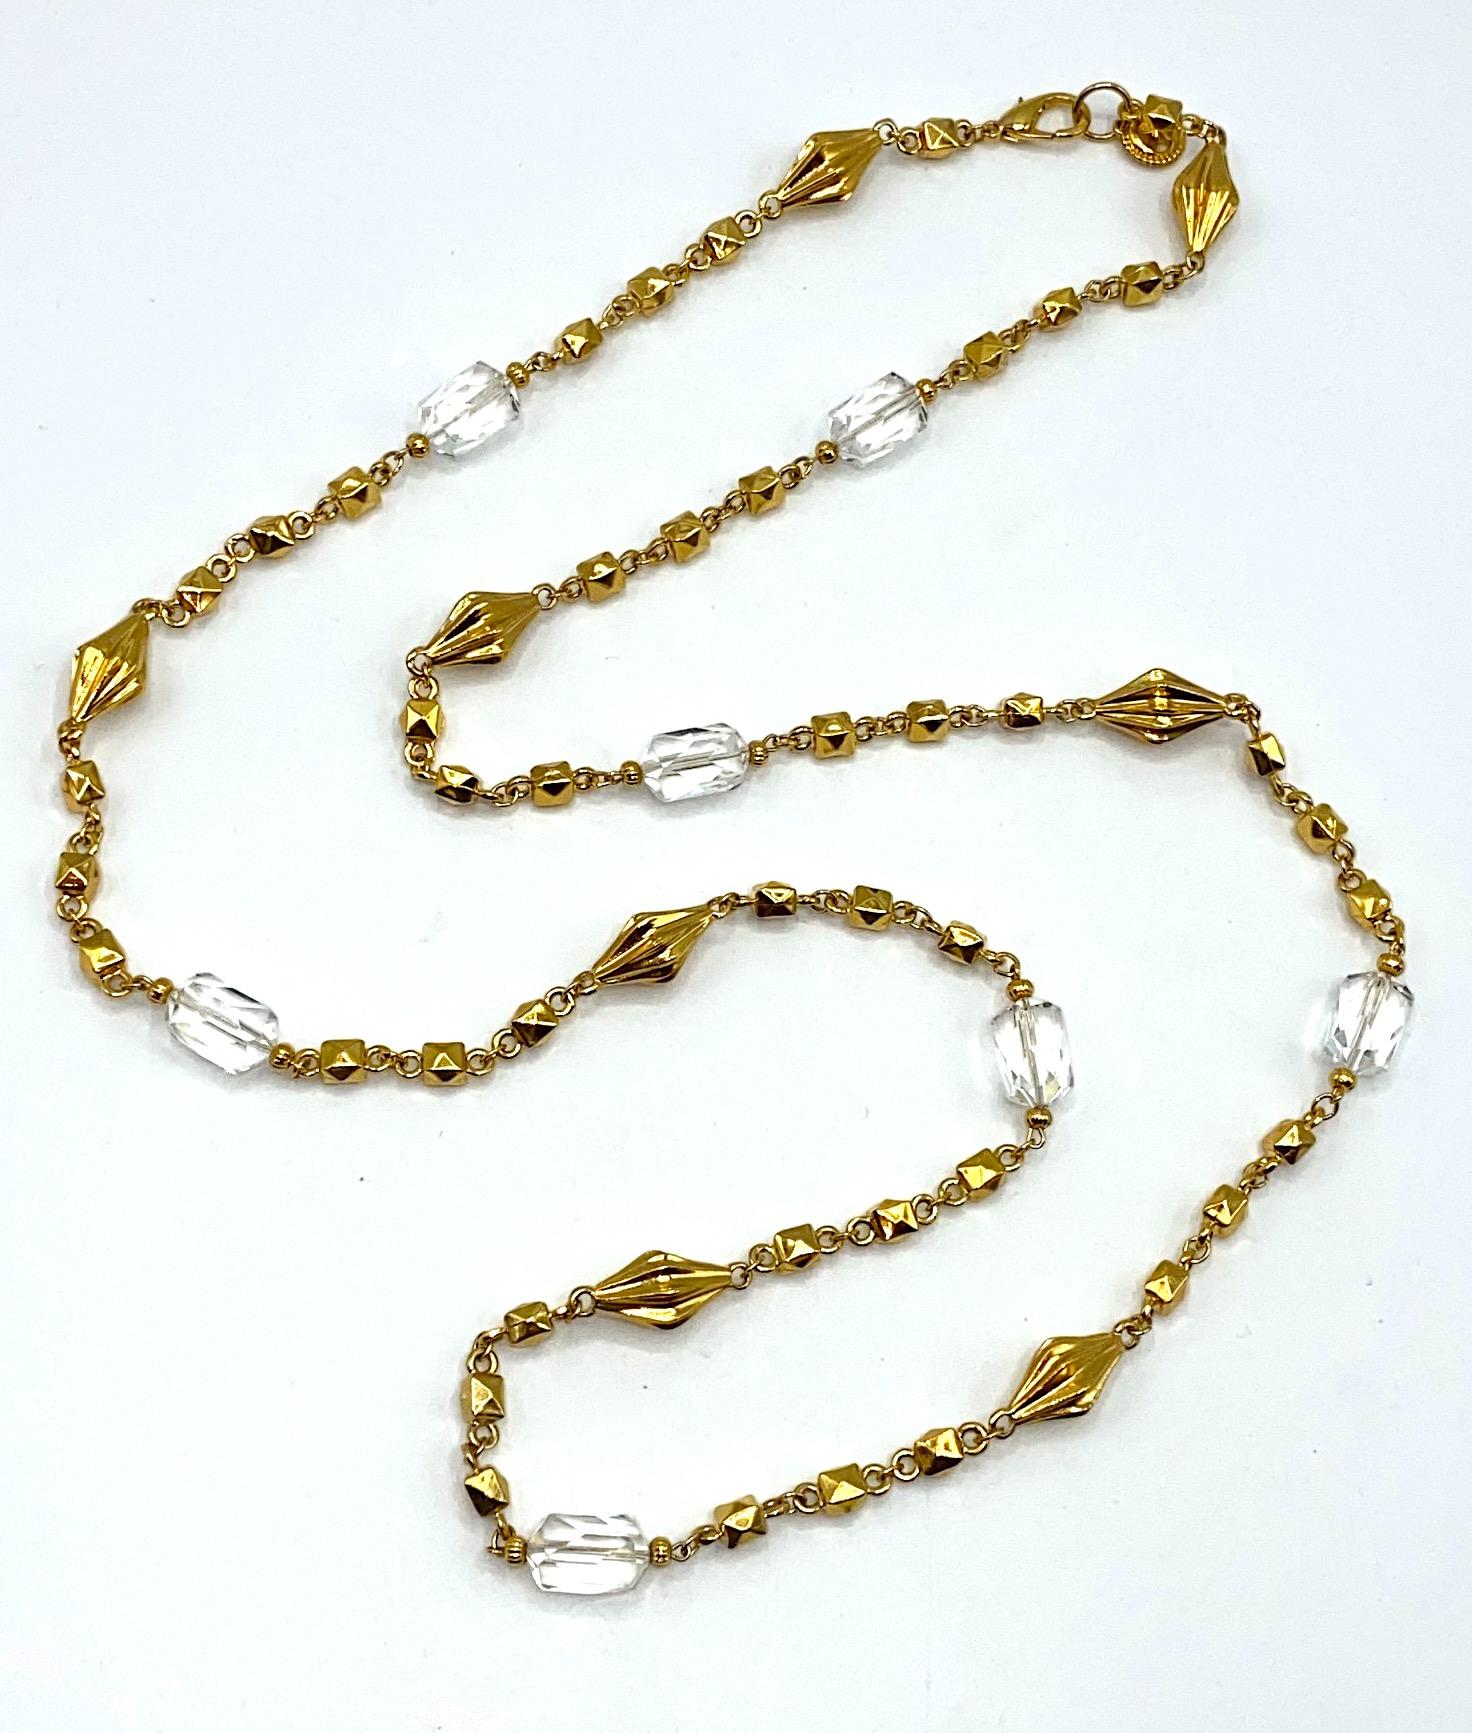 A lovely St. John Collection gold long necklace with clear crystal beads circa 1990. The chain is a mix of gold round links, pointed cube links and fluted round diamond shape gold plated beads. Additionally, the necklace has seven multi faceted